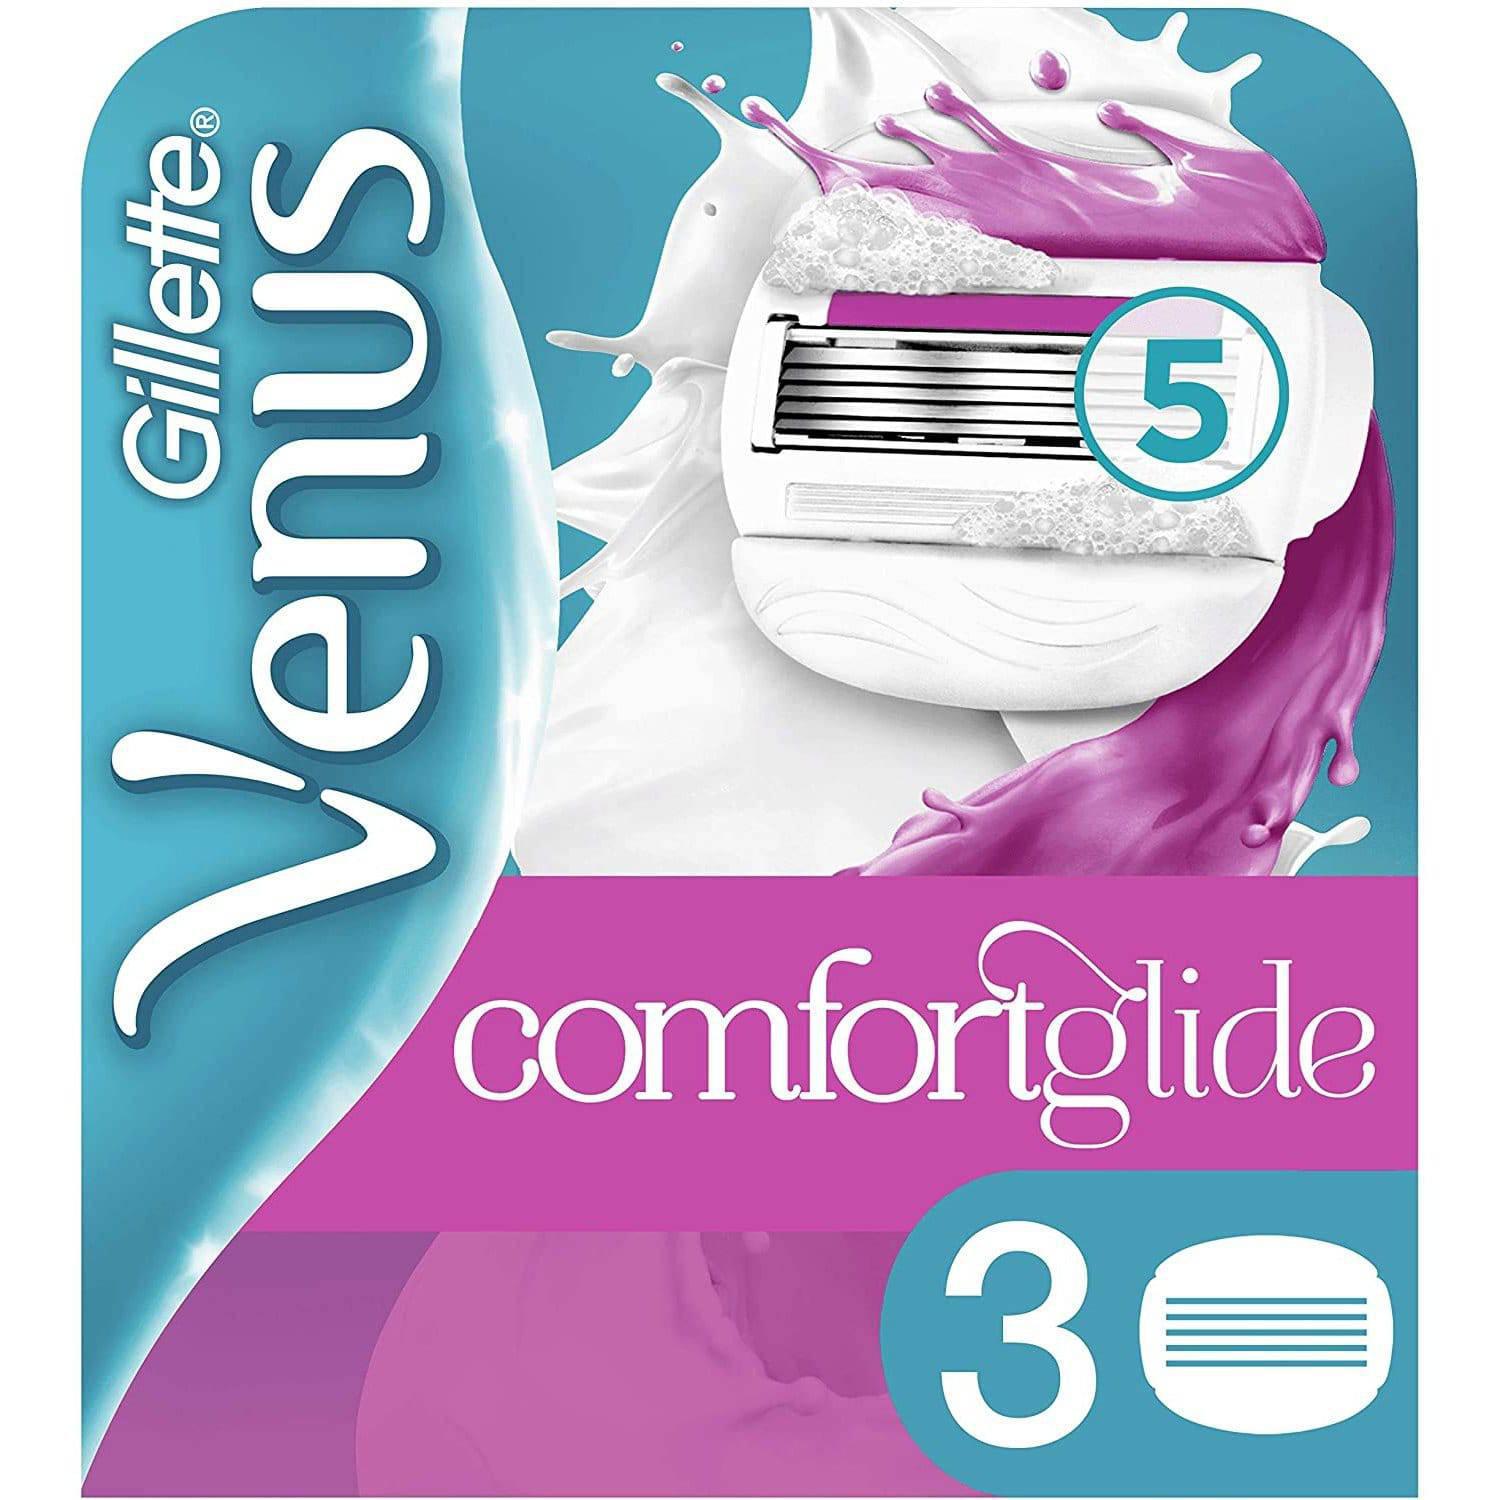 Gillette Venus Comfortglide Sugarberry with Olay 2-in-1 Women's Razor Blades, 3 Pack - with Shaving Gel Bars - Healthxpress.ie